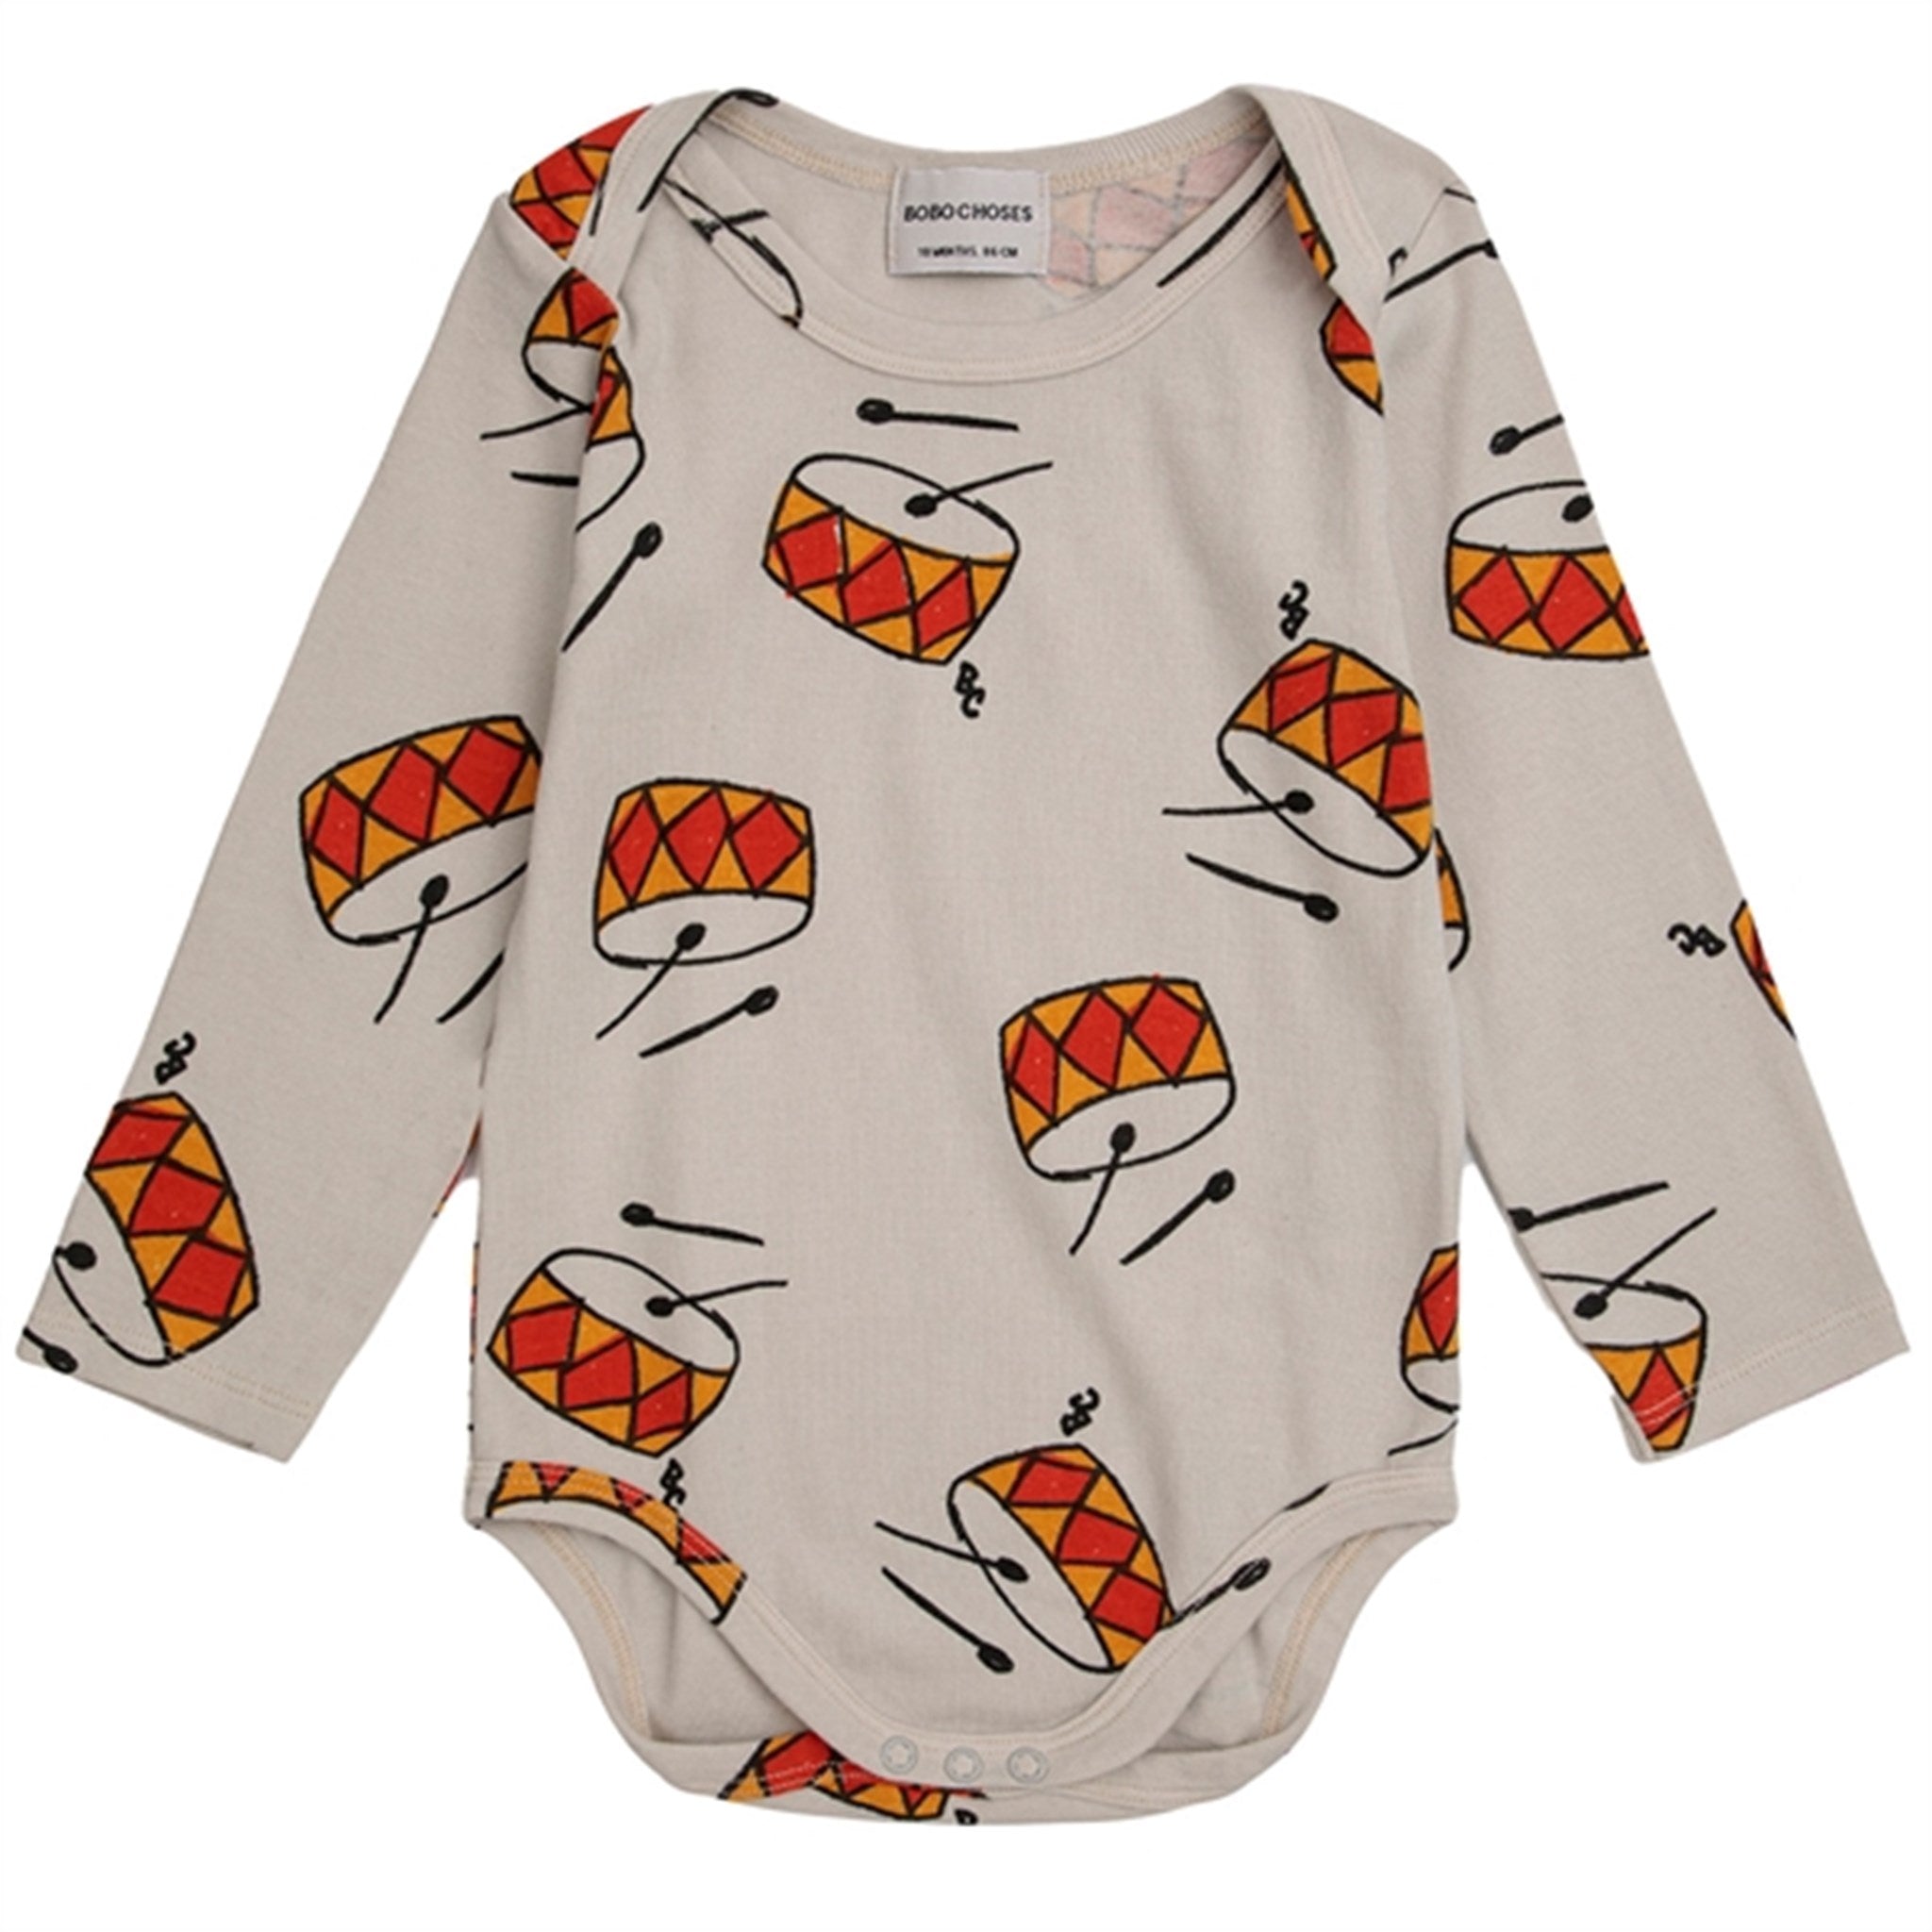 Bobo Choses Baby Play The Drum All Over Body Long Sleeve Beige